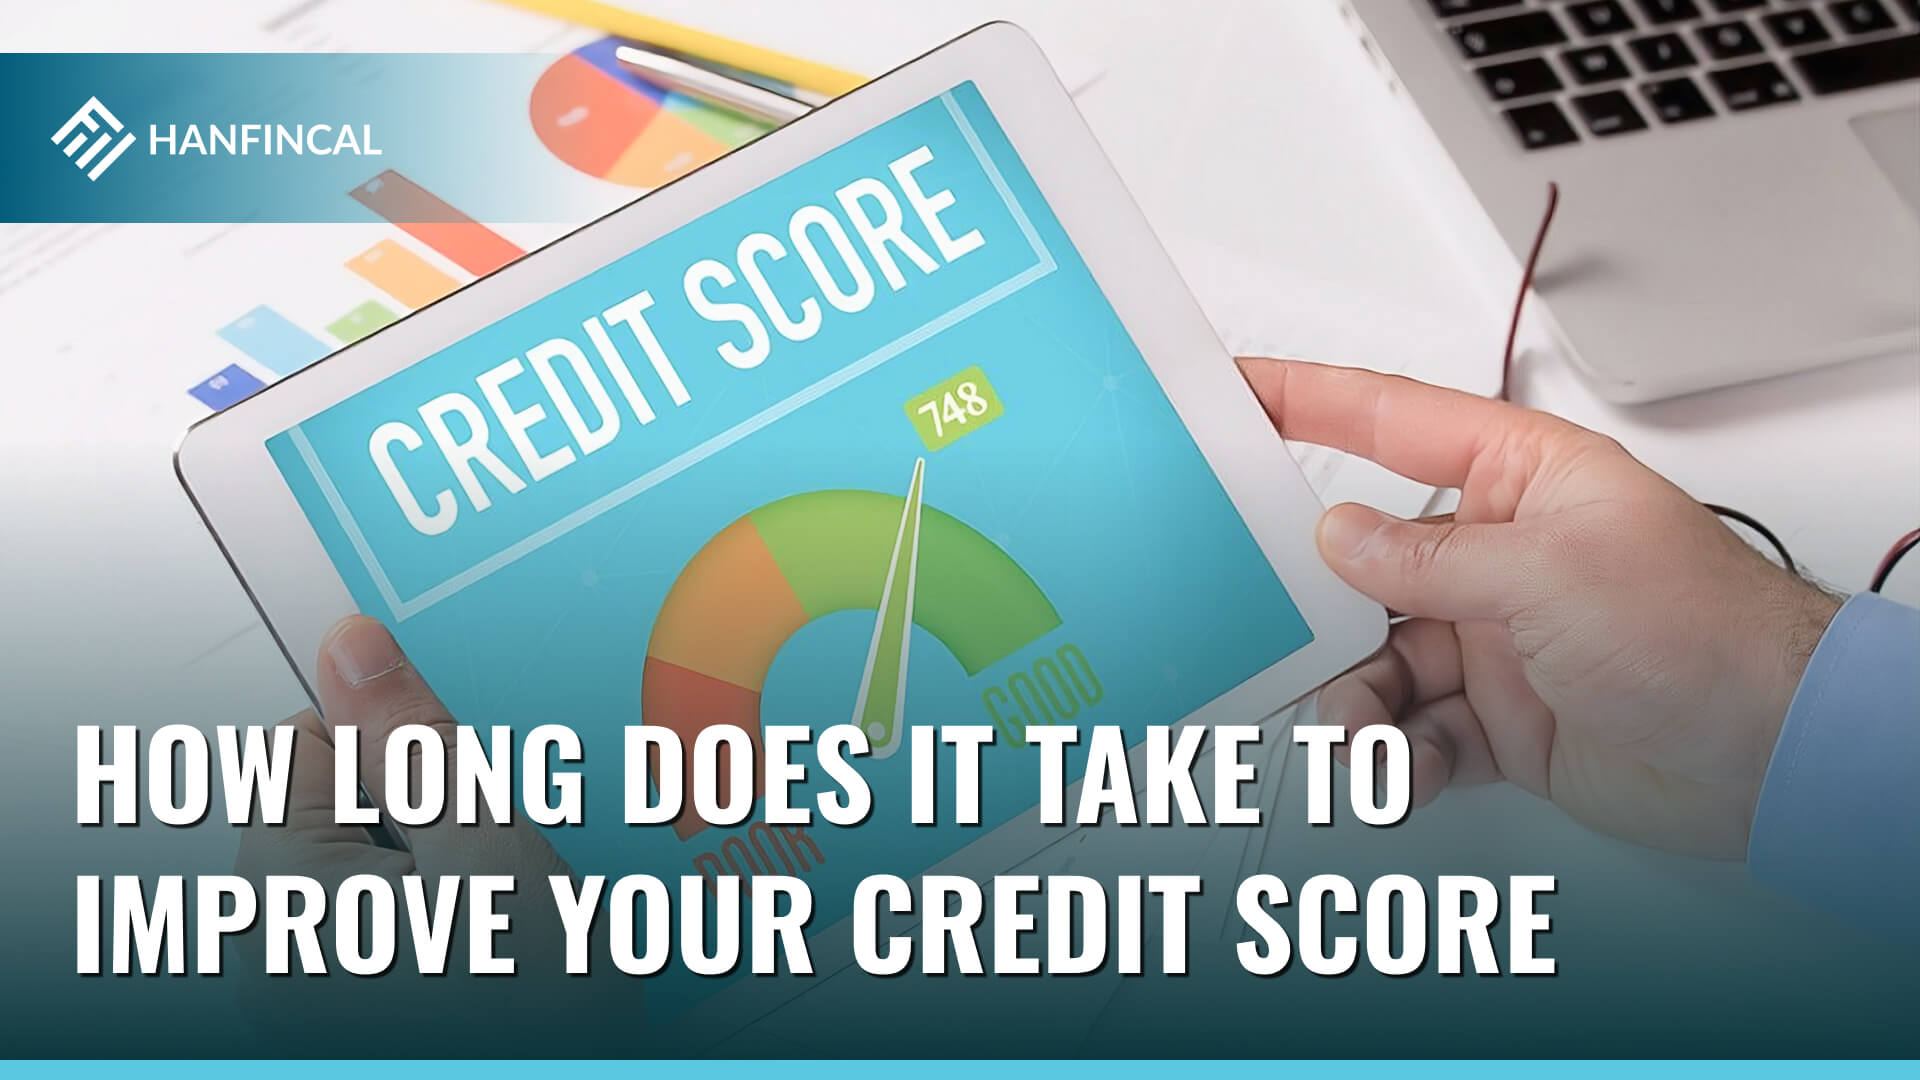 How long does it take to build credit score?